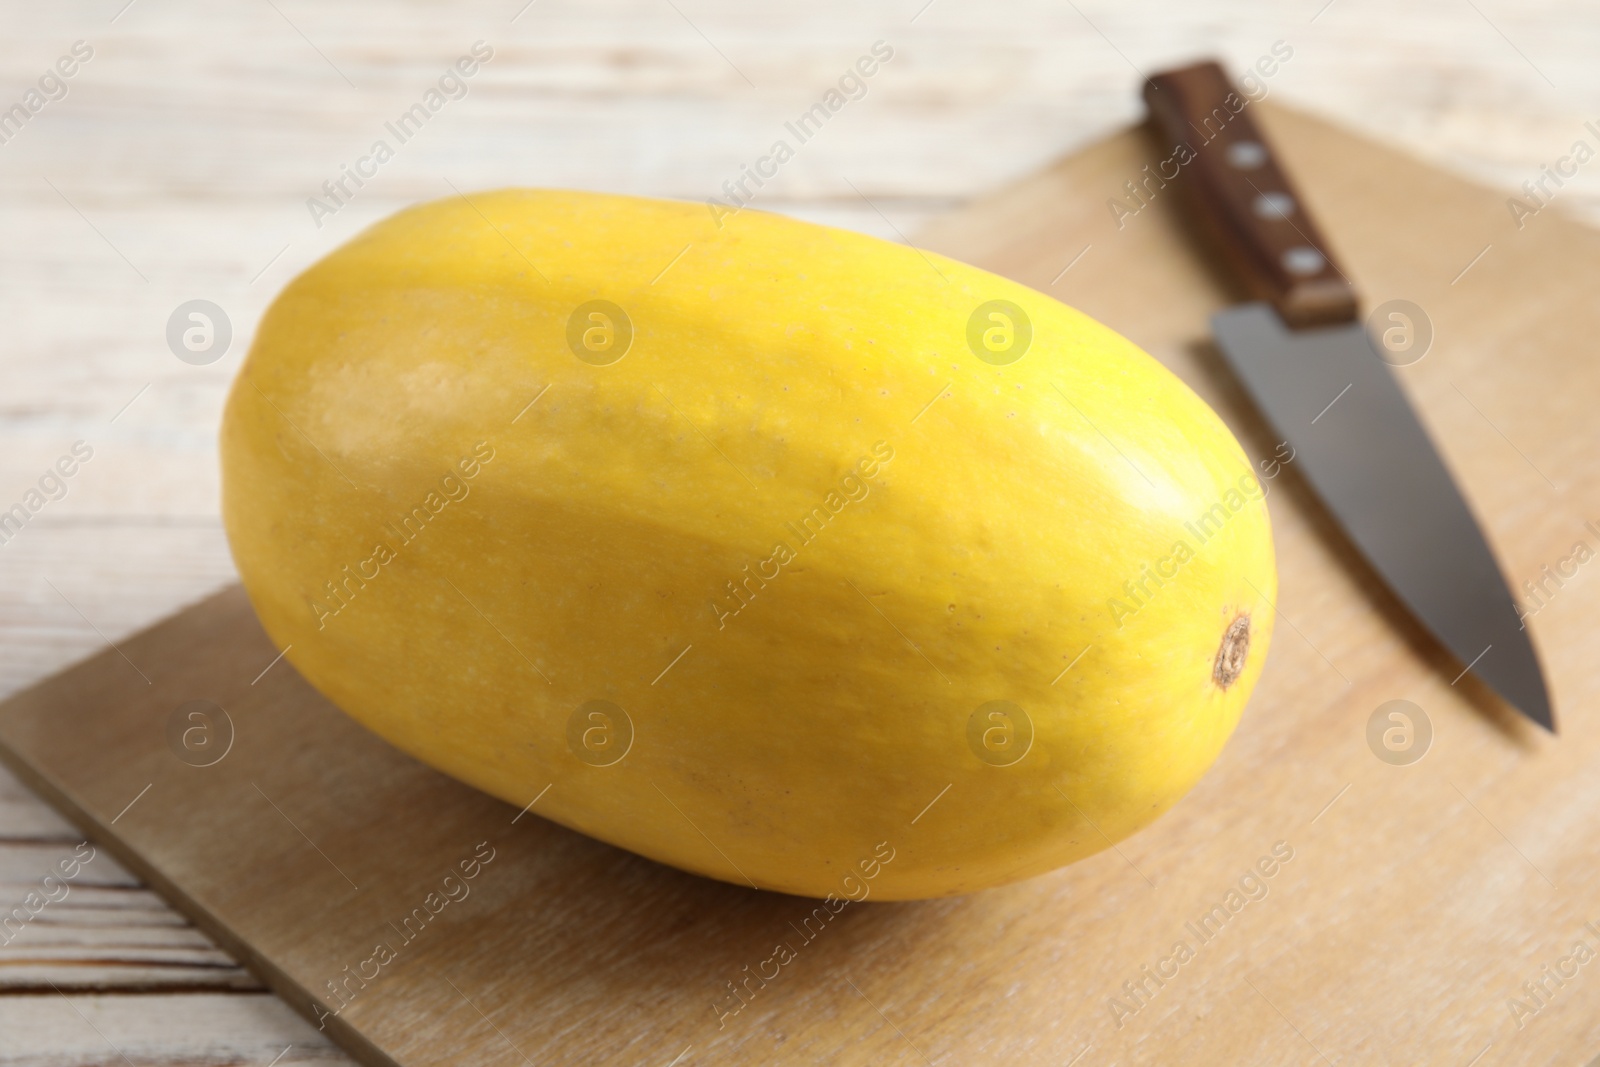 Photo of Ripe spaghetti squash and knife on wooden board